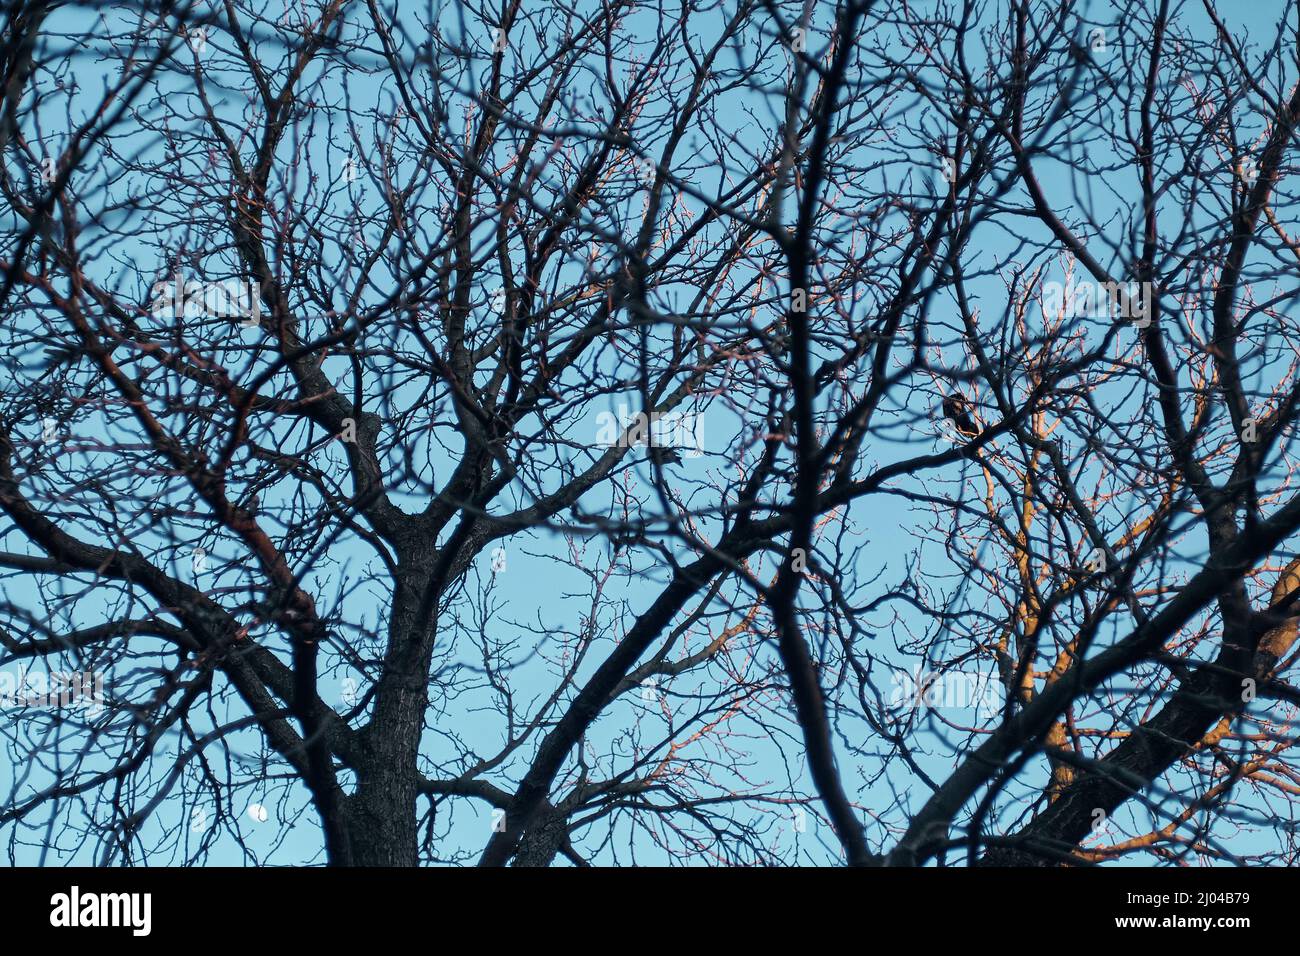 Tree branches with crows against blue sky Stock Photo